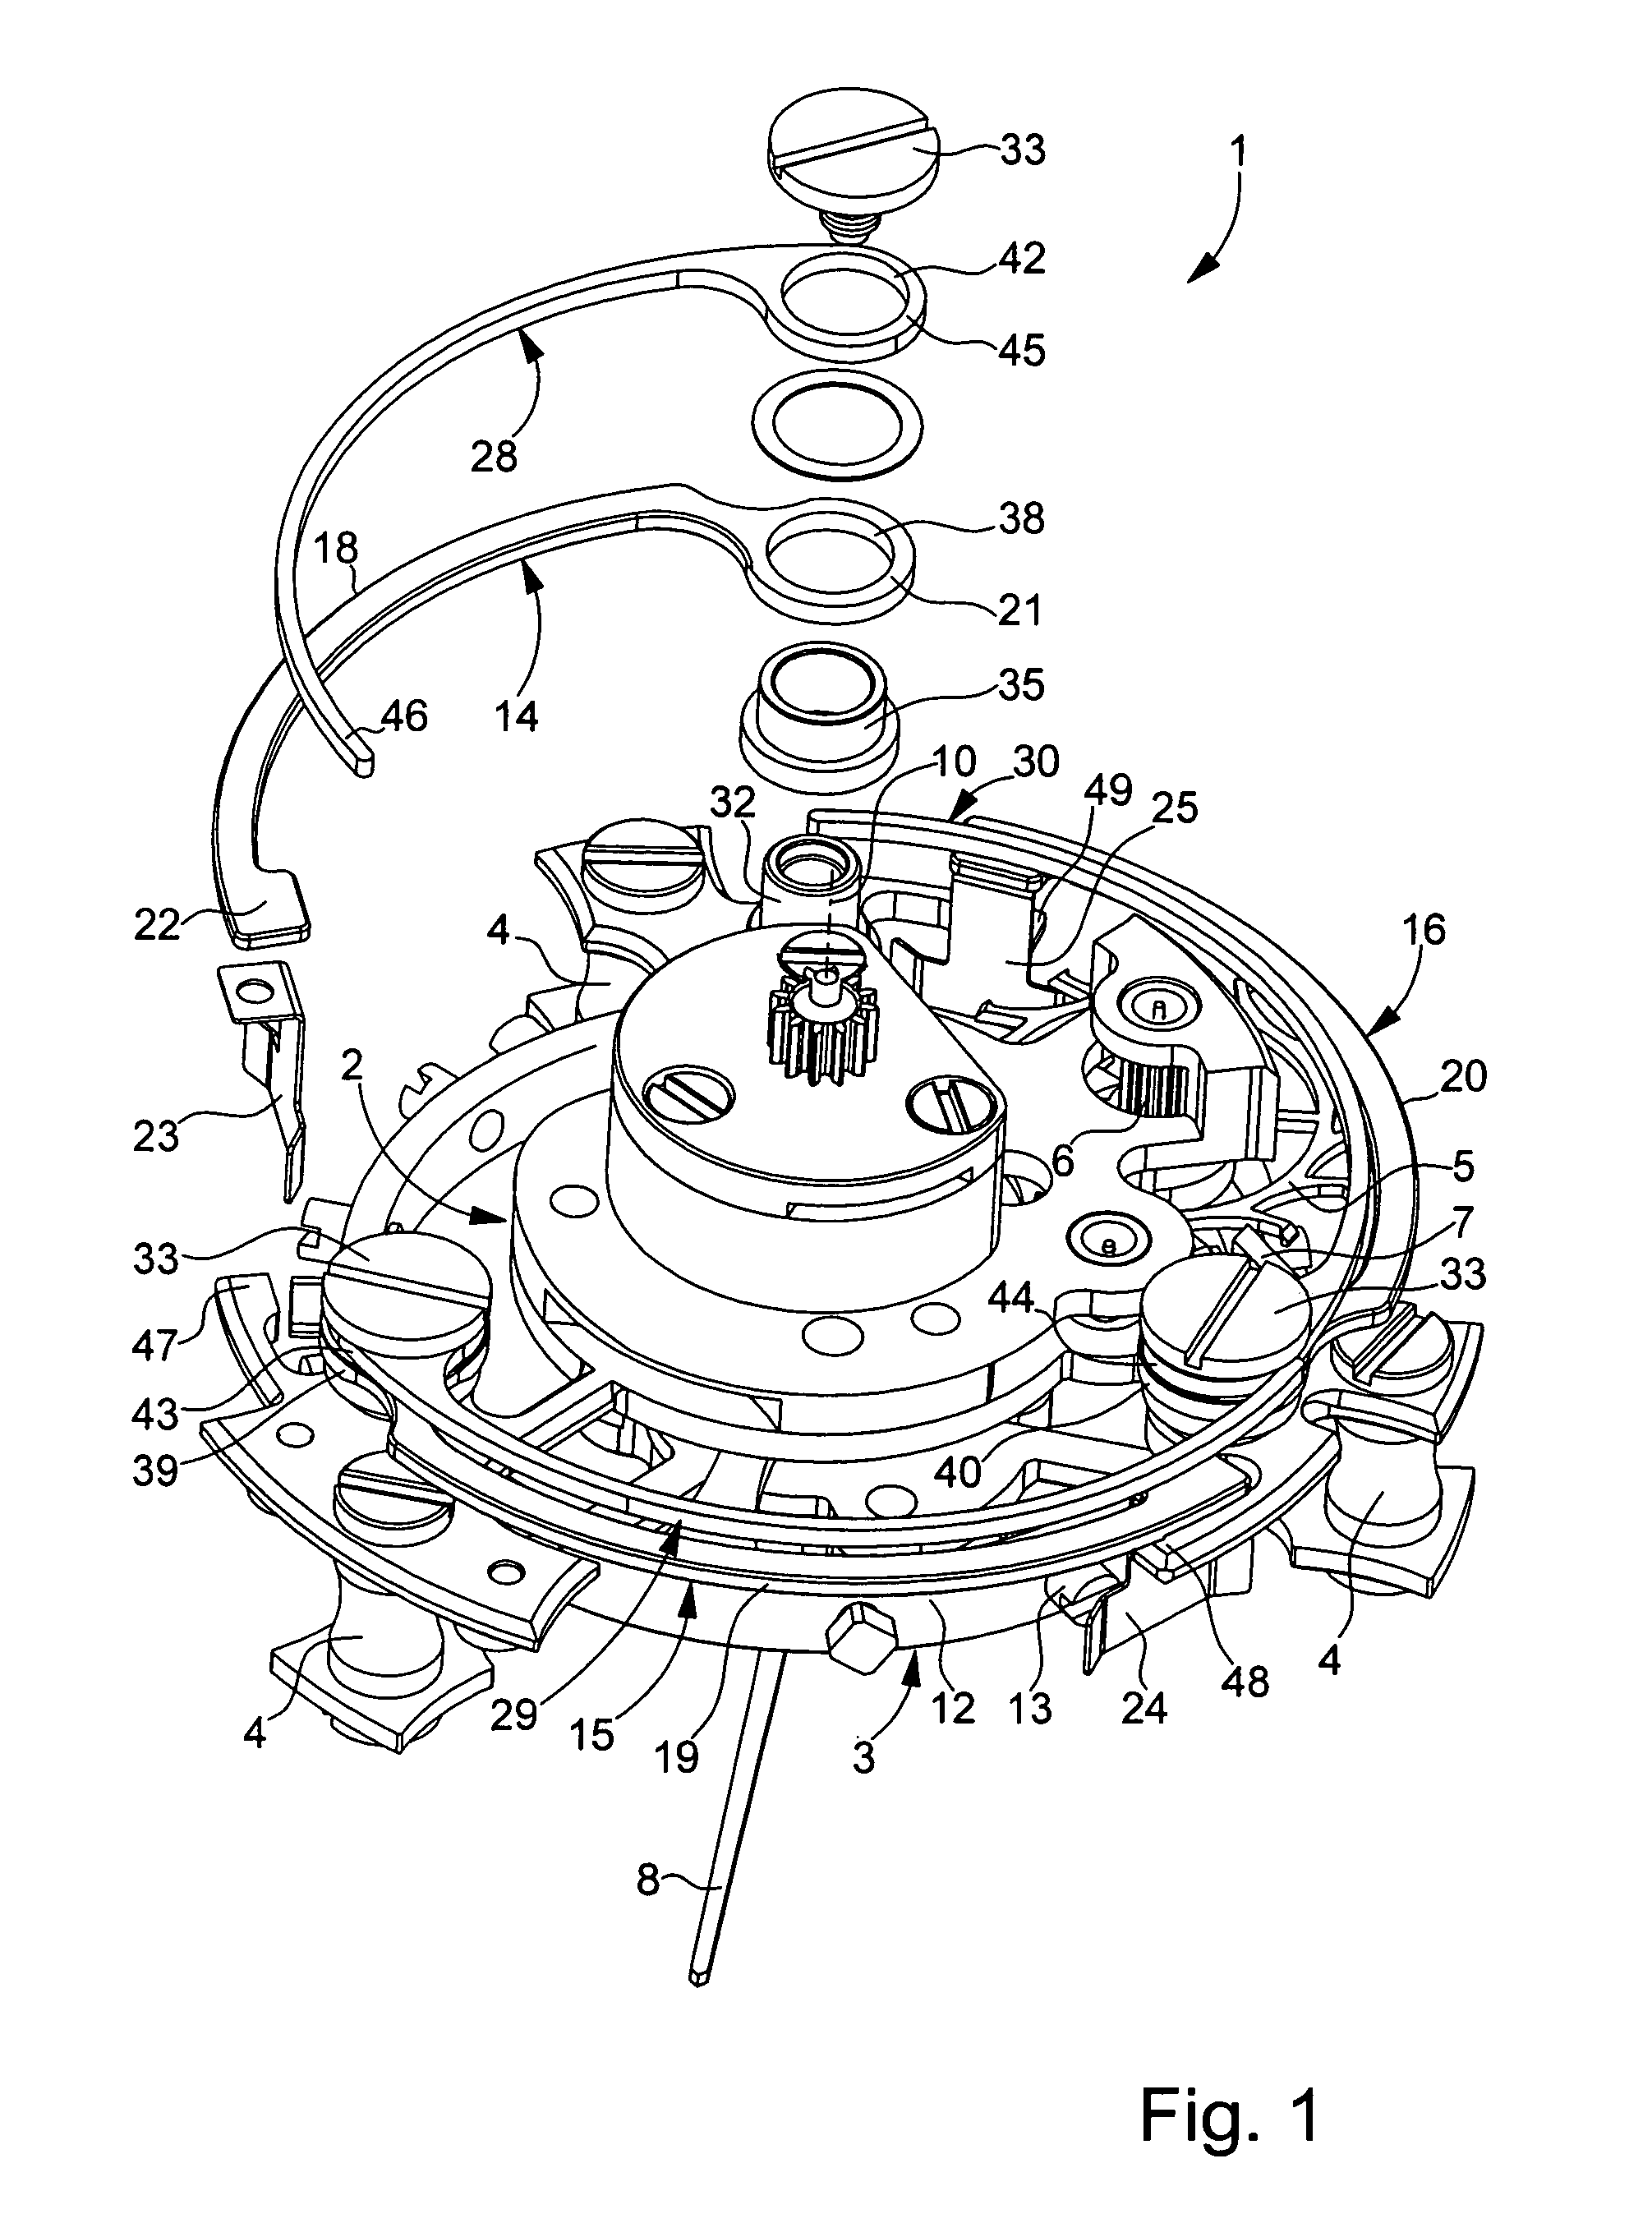 Device for stopping the balance during the time-setting of a tourbillon watch